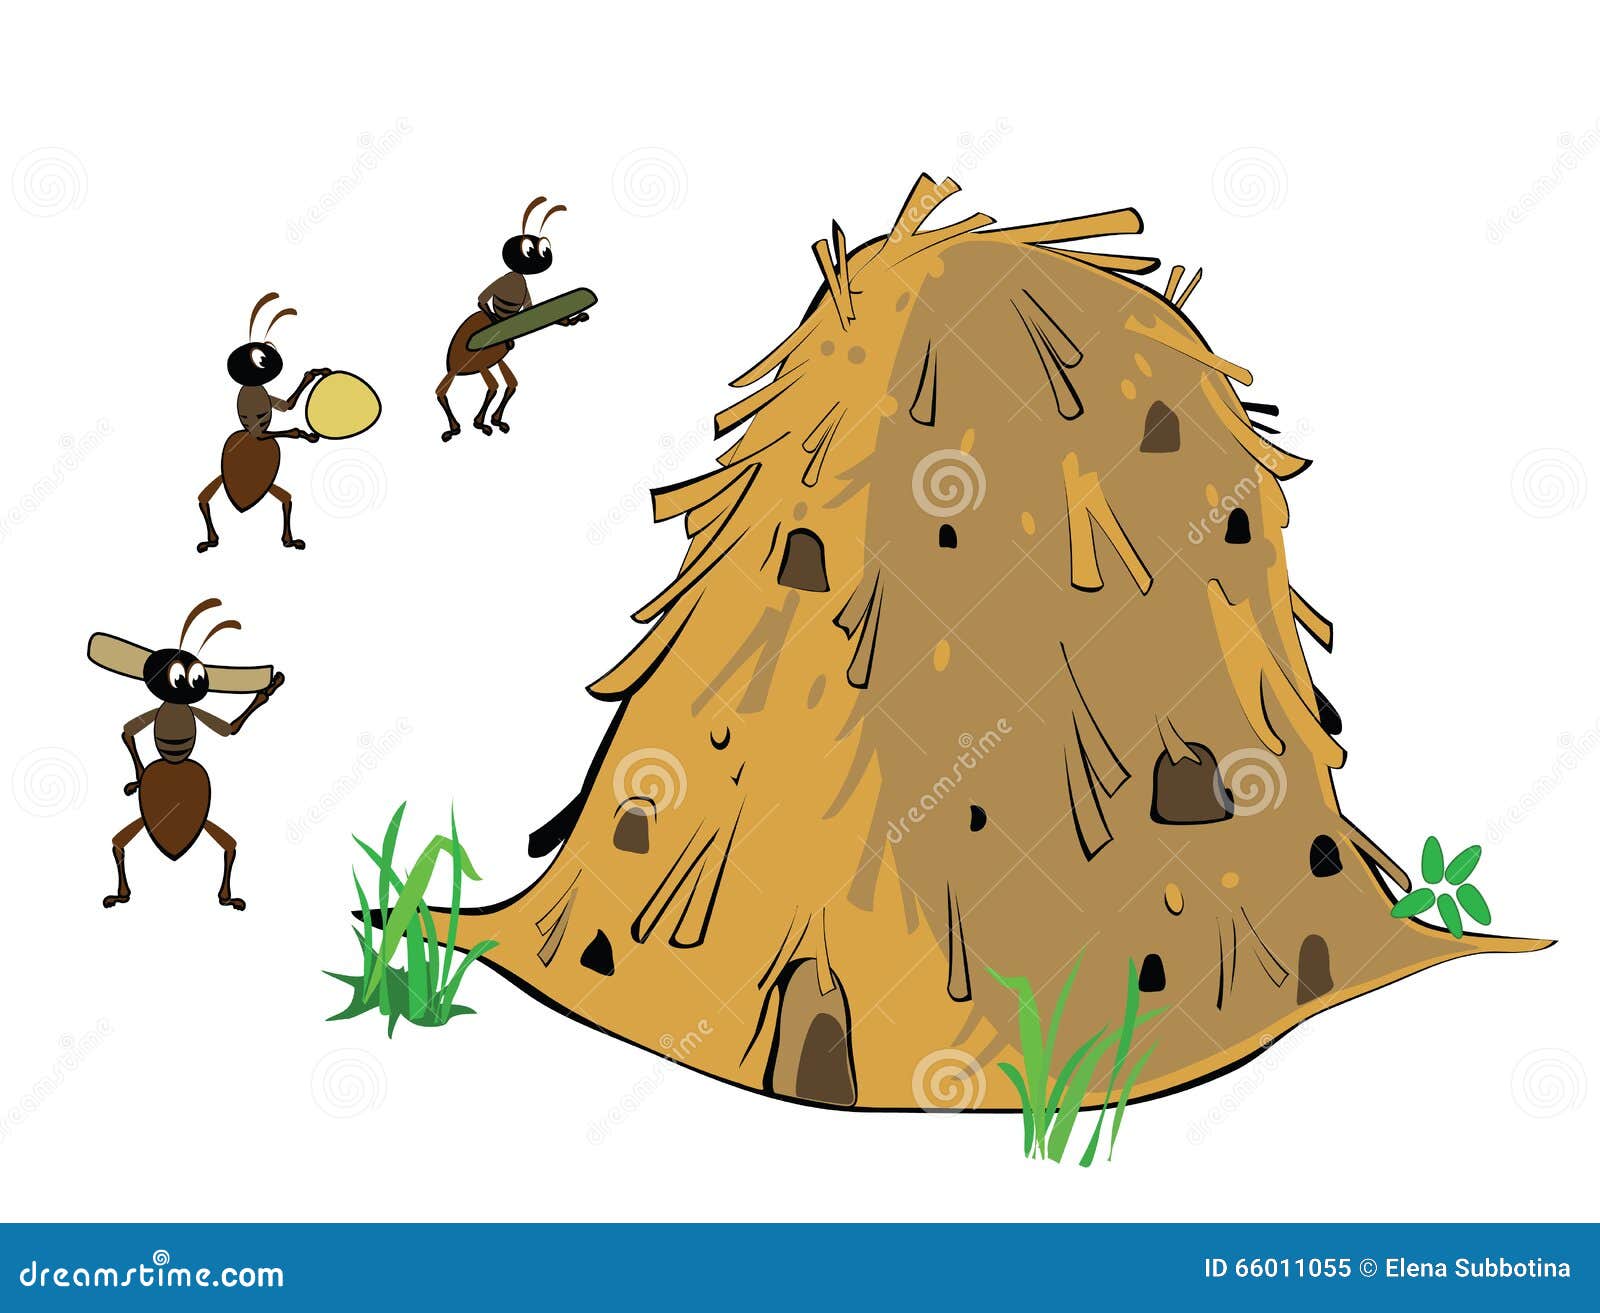 anthill and ants